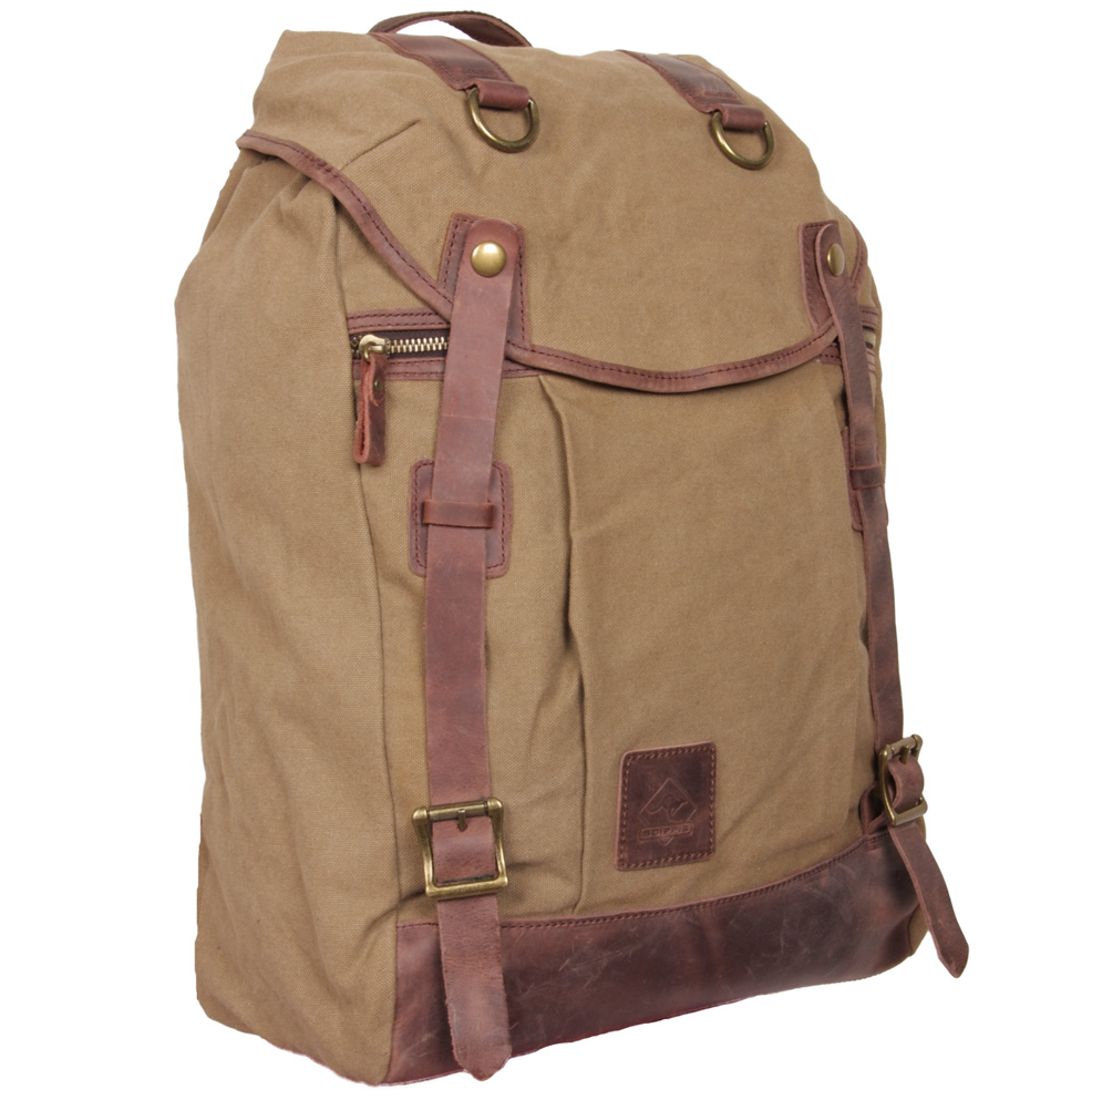 Scippis Rucksack - Coogee Backpack